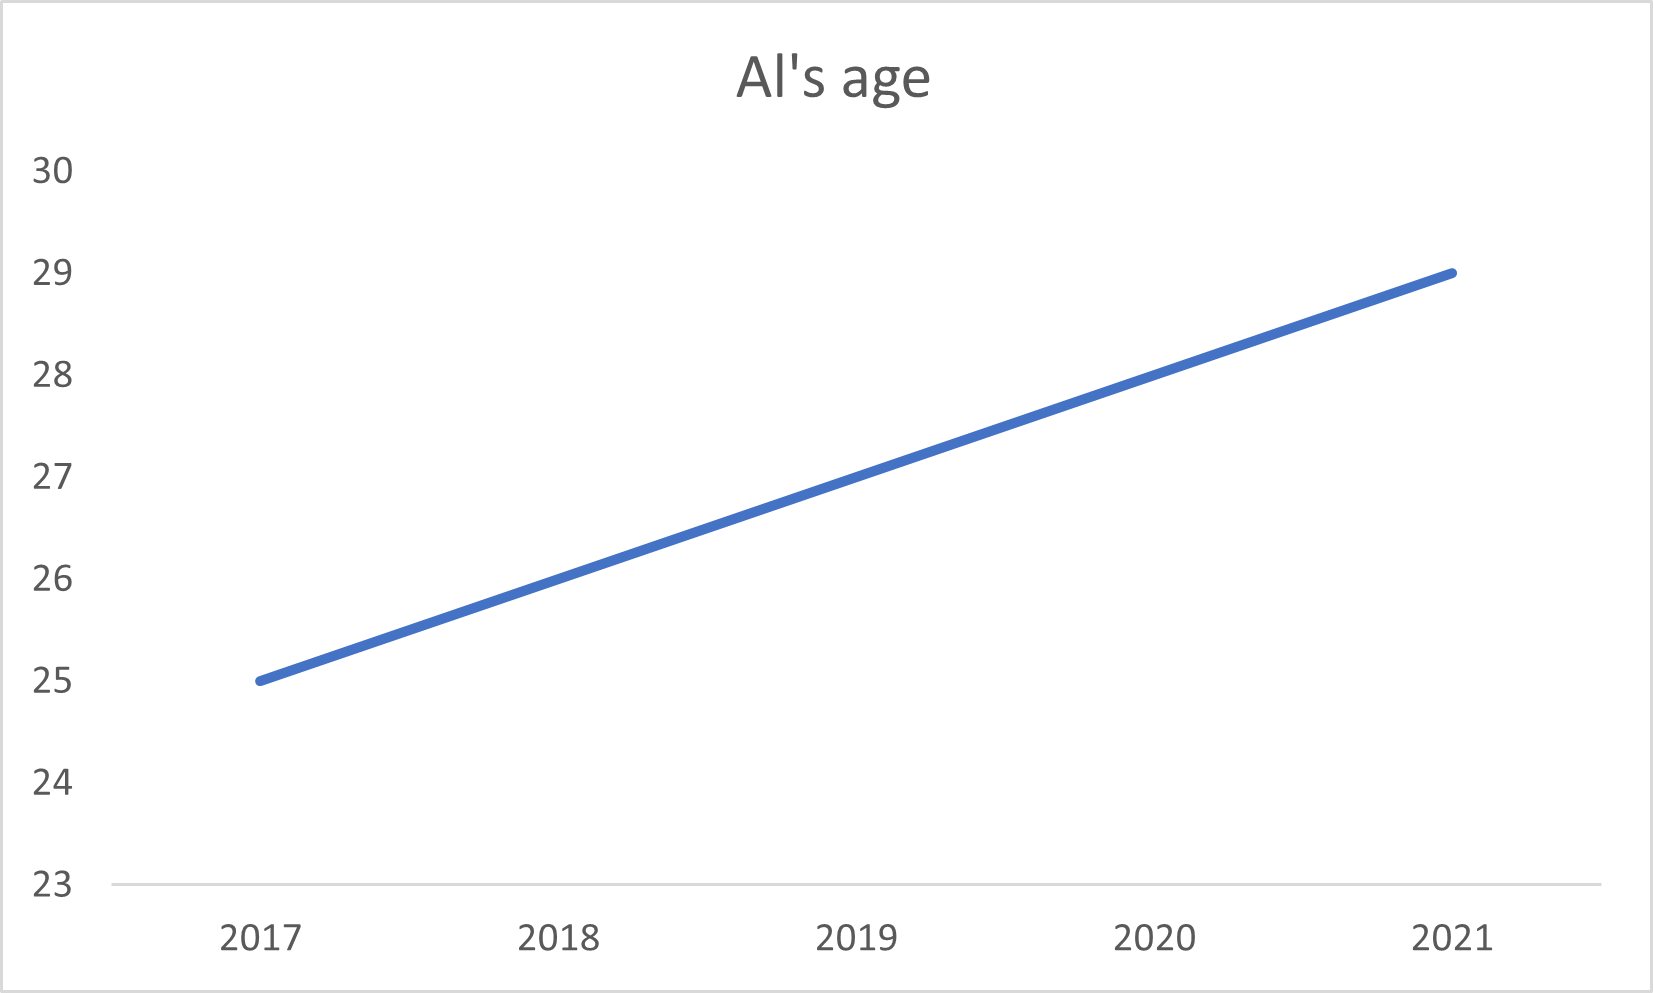 Time series of Al’s age